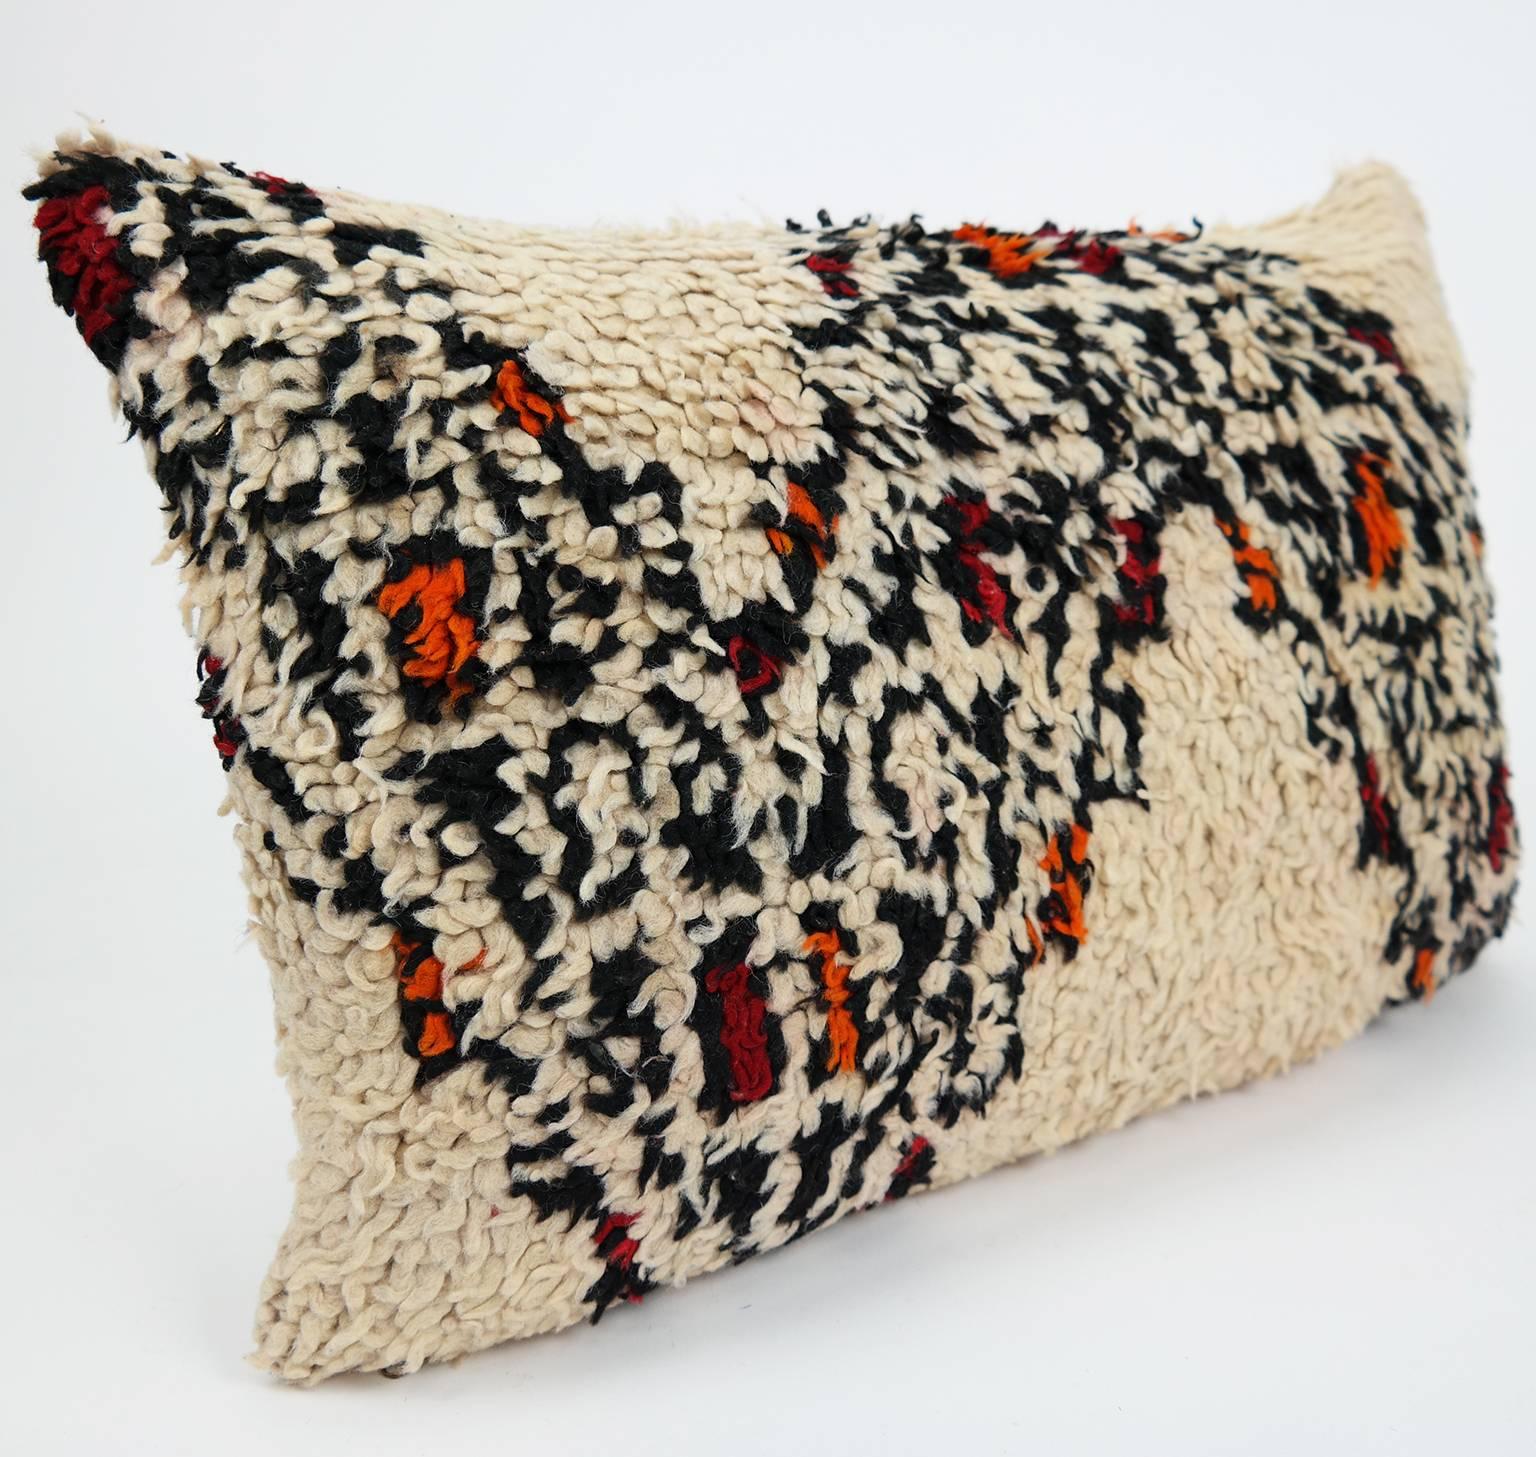 Beautiful cushion with warm red and orange color accents, custom made from a vintage Beni Ourain rug made in Morocco. Our Beni cushions are a one-of-a-kind, no two are ever the same. Beni Ourain rugs have a story to tell. The woolly Berber rugs have